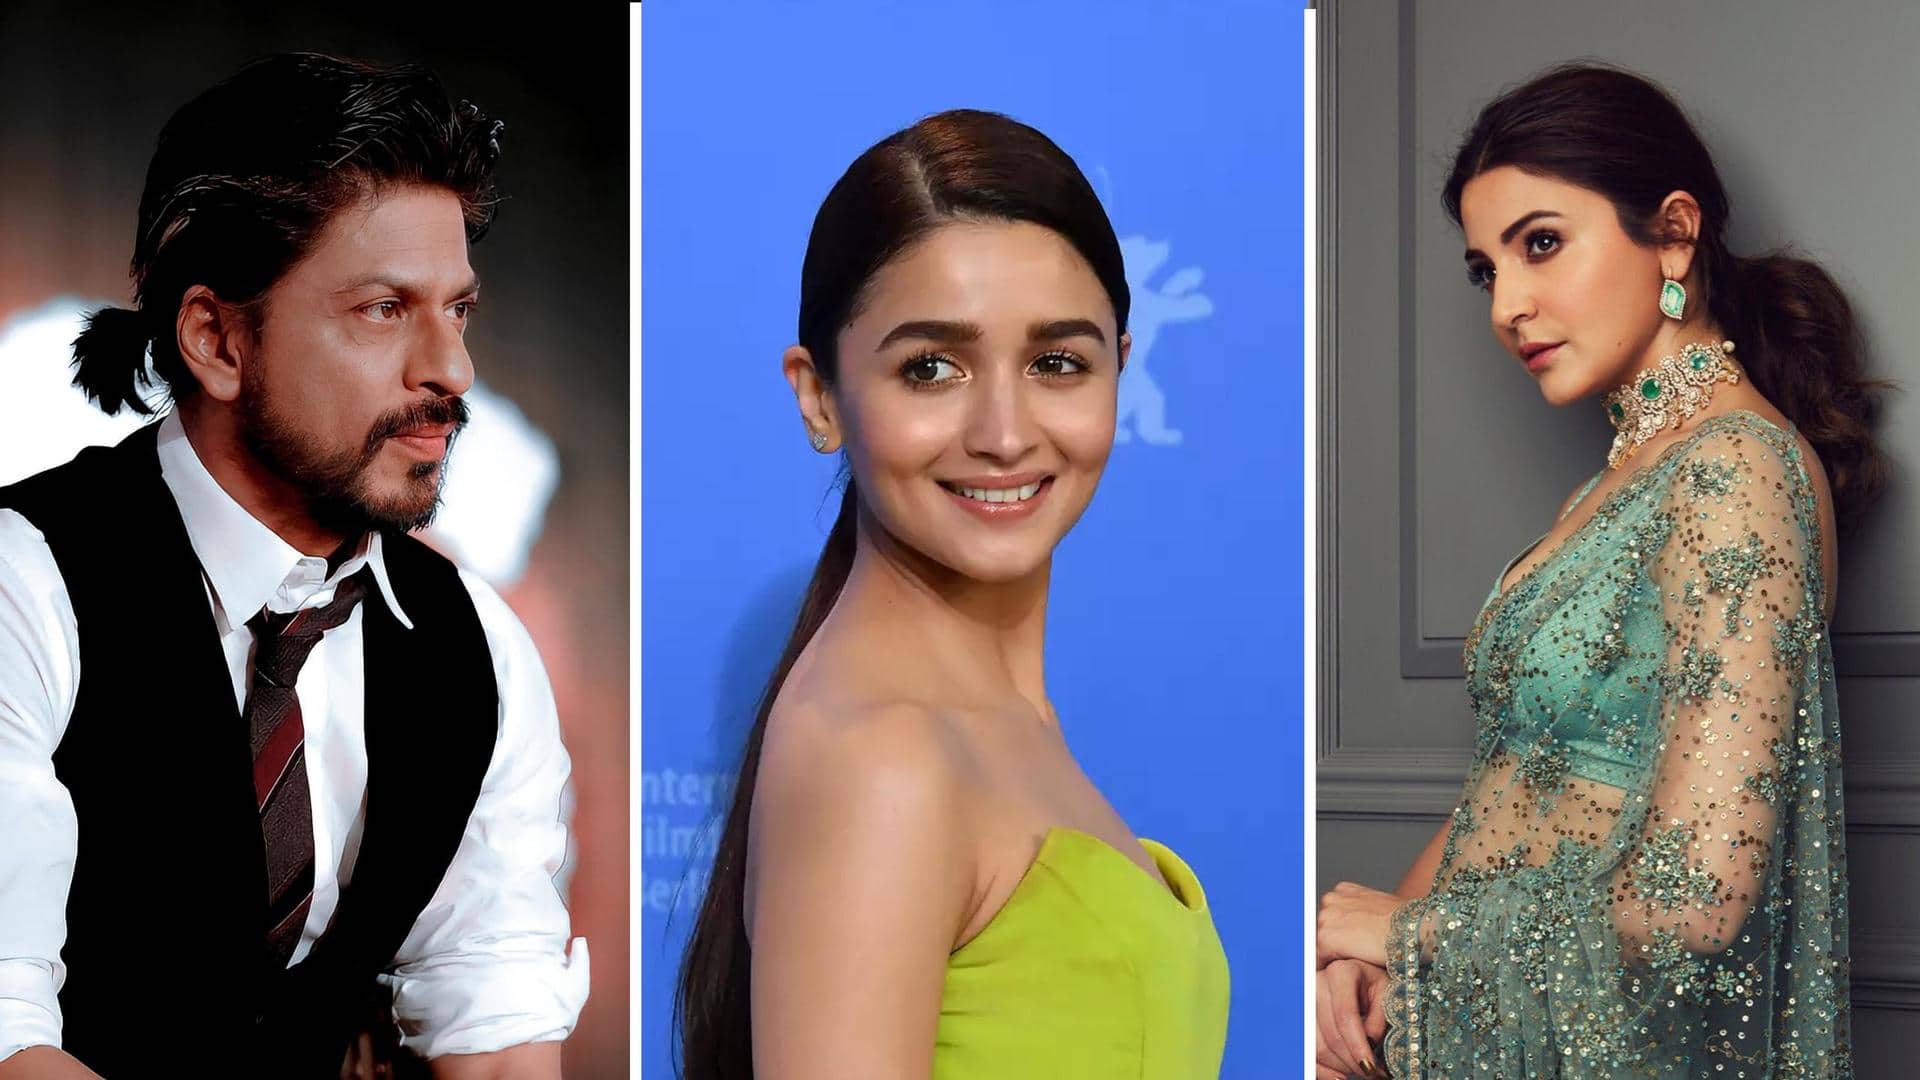 Instagram user compares Bollywood celebrities to cities, attracts varied reactions